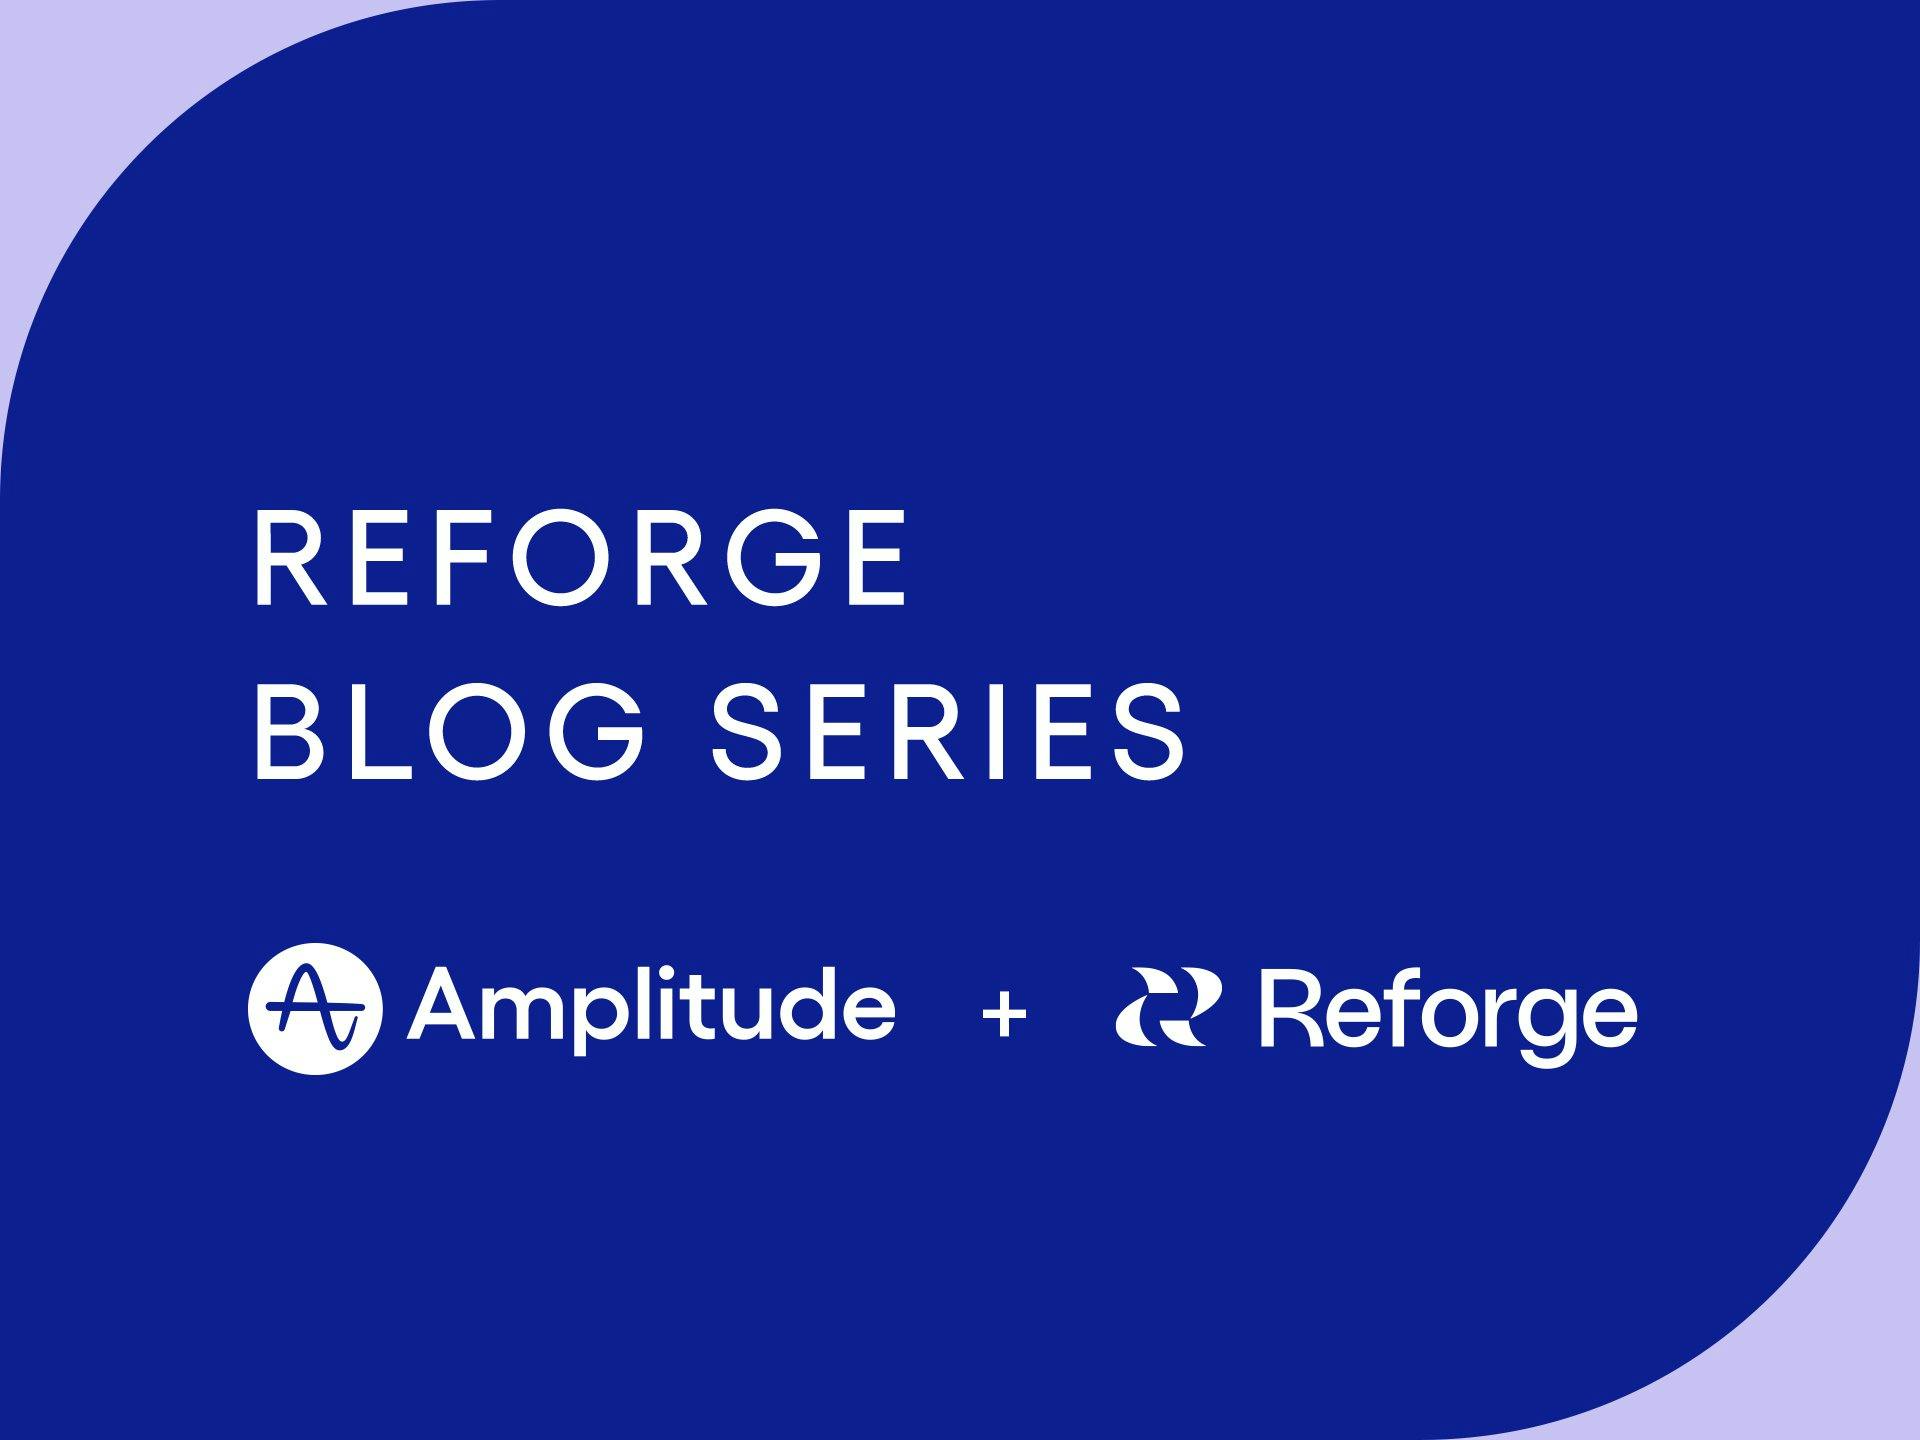 Blue background thumbnail image featuring Amplitude and Reforge logos in support of a three blog series